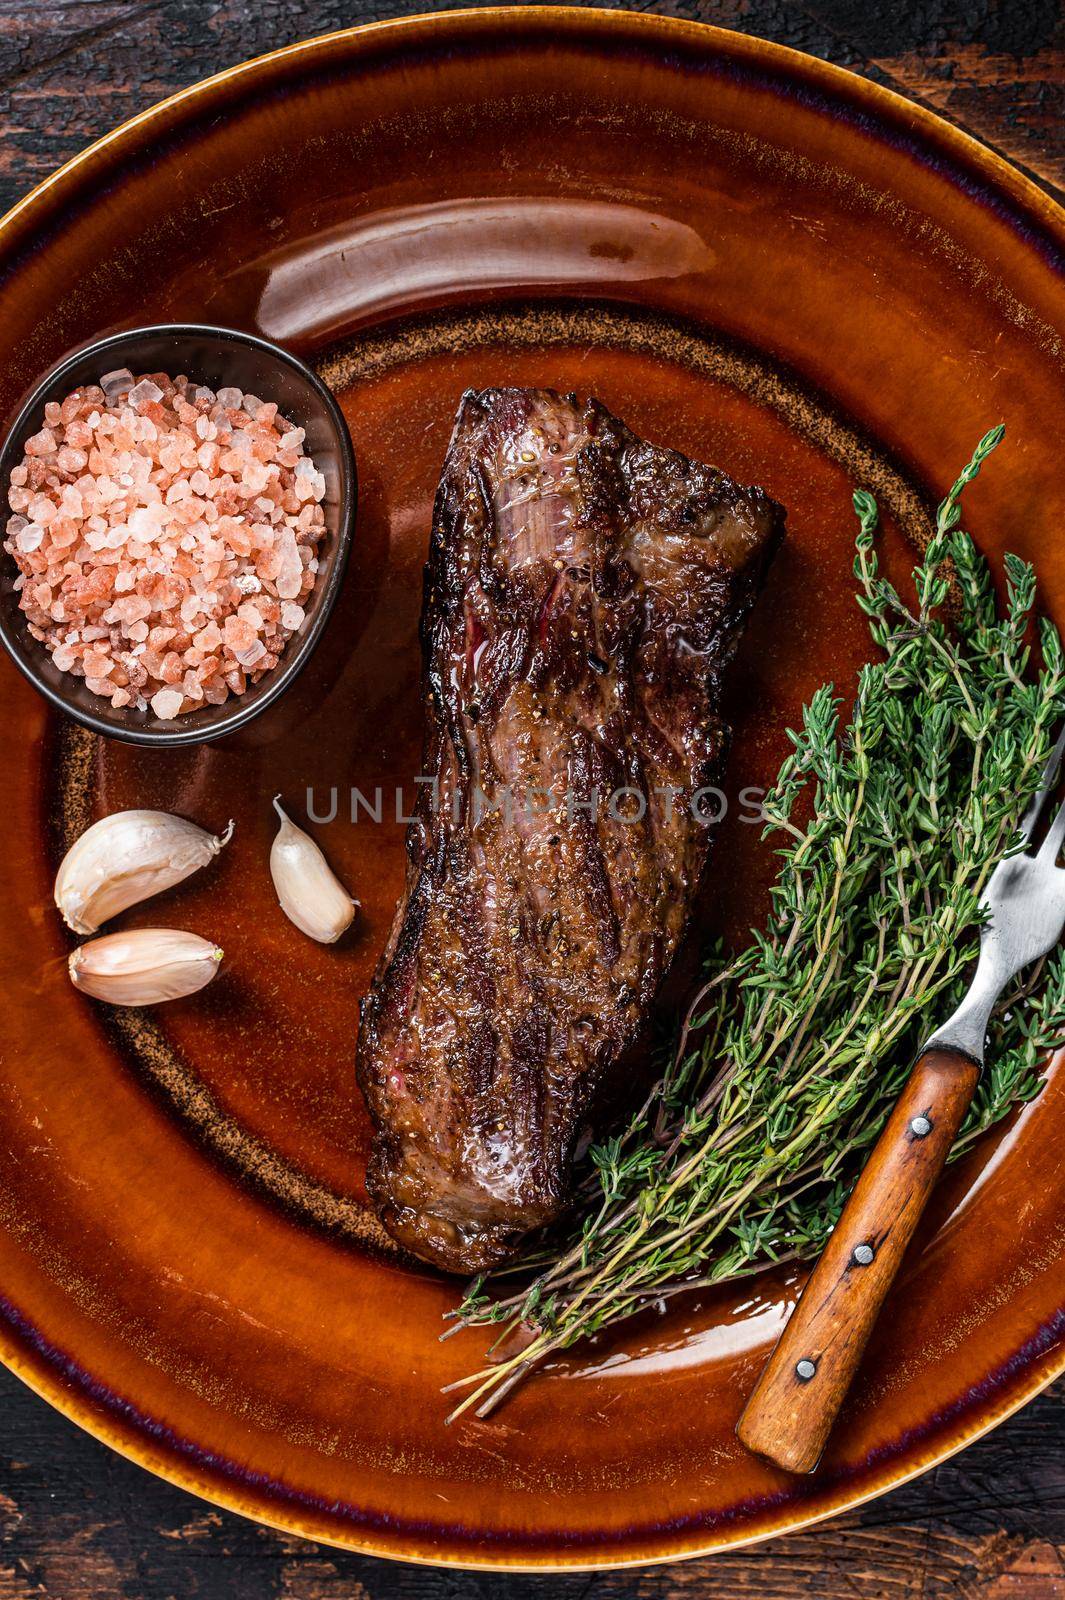 Grilled machete skirt beef steak on rustic plate with herbs and pink salt. Dark wooden background. Top view.